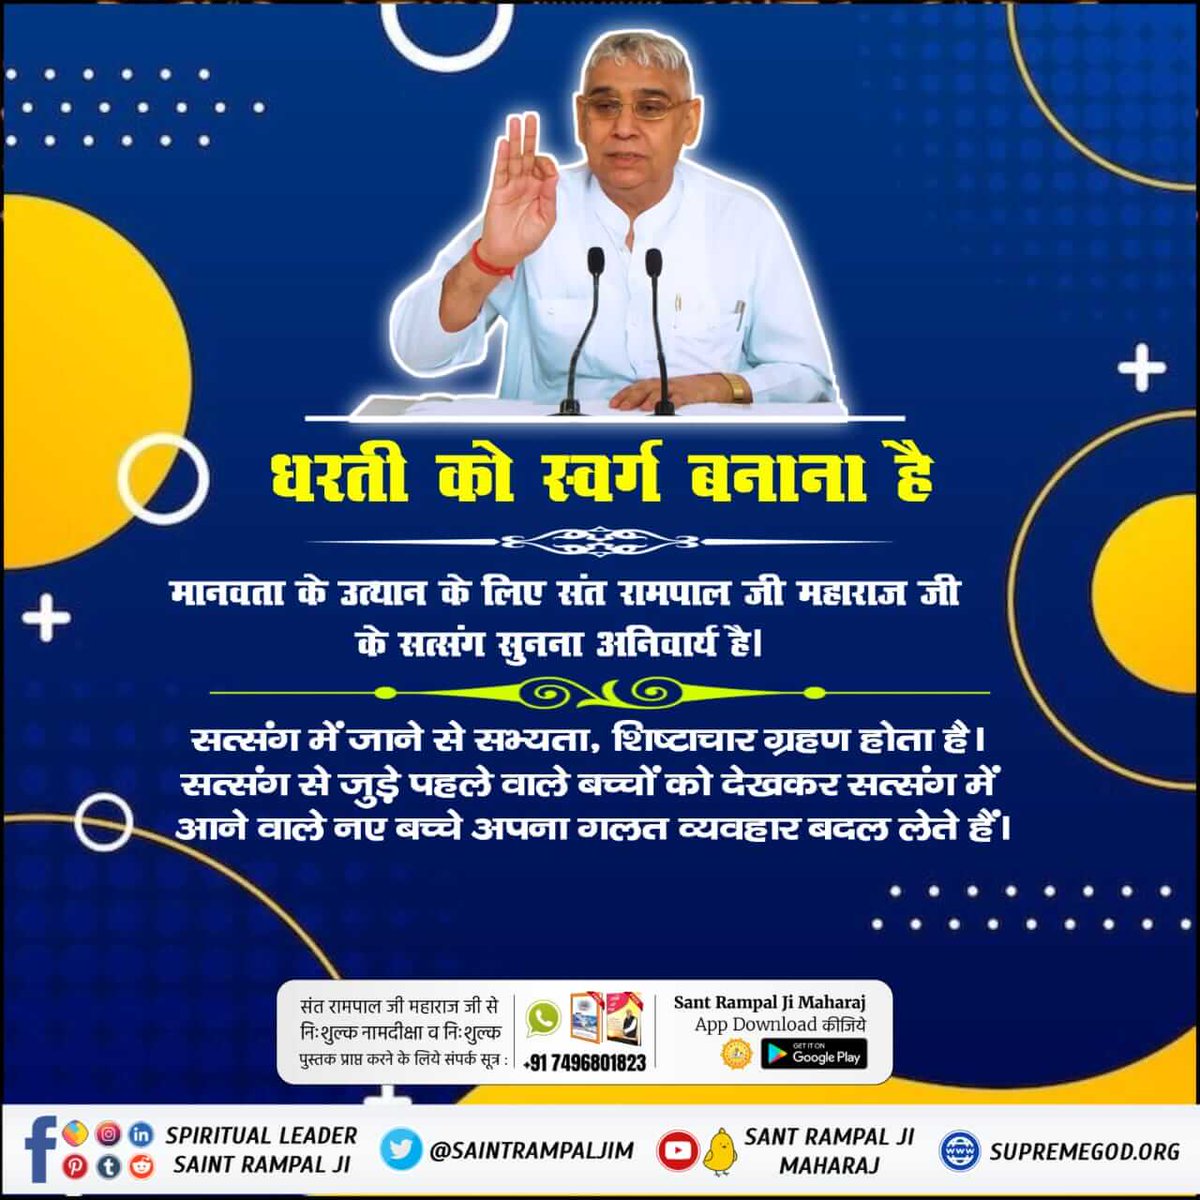 #सुनो_गीता_अमृत_ज्ञान
What is the real knowledge mentioned in our holy book gitaji?
Have you read the book or are you just following folk advices to do holt practices?!
Followng scripture based bhakti practices will ONLY lead you to the path of salvation!